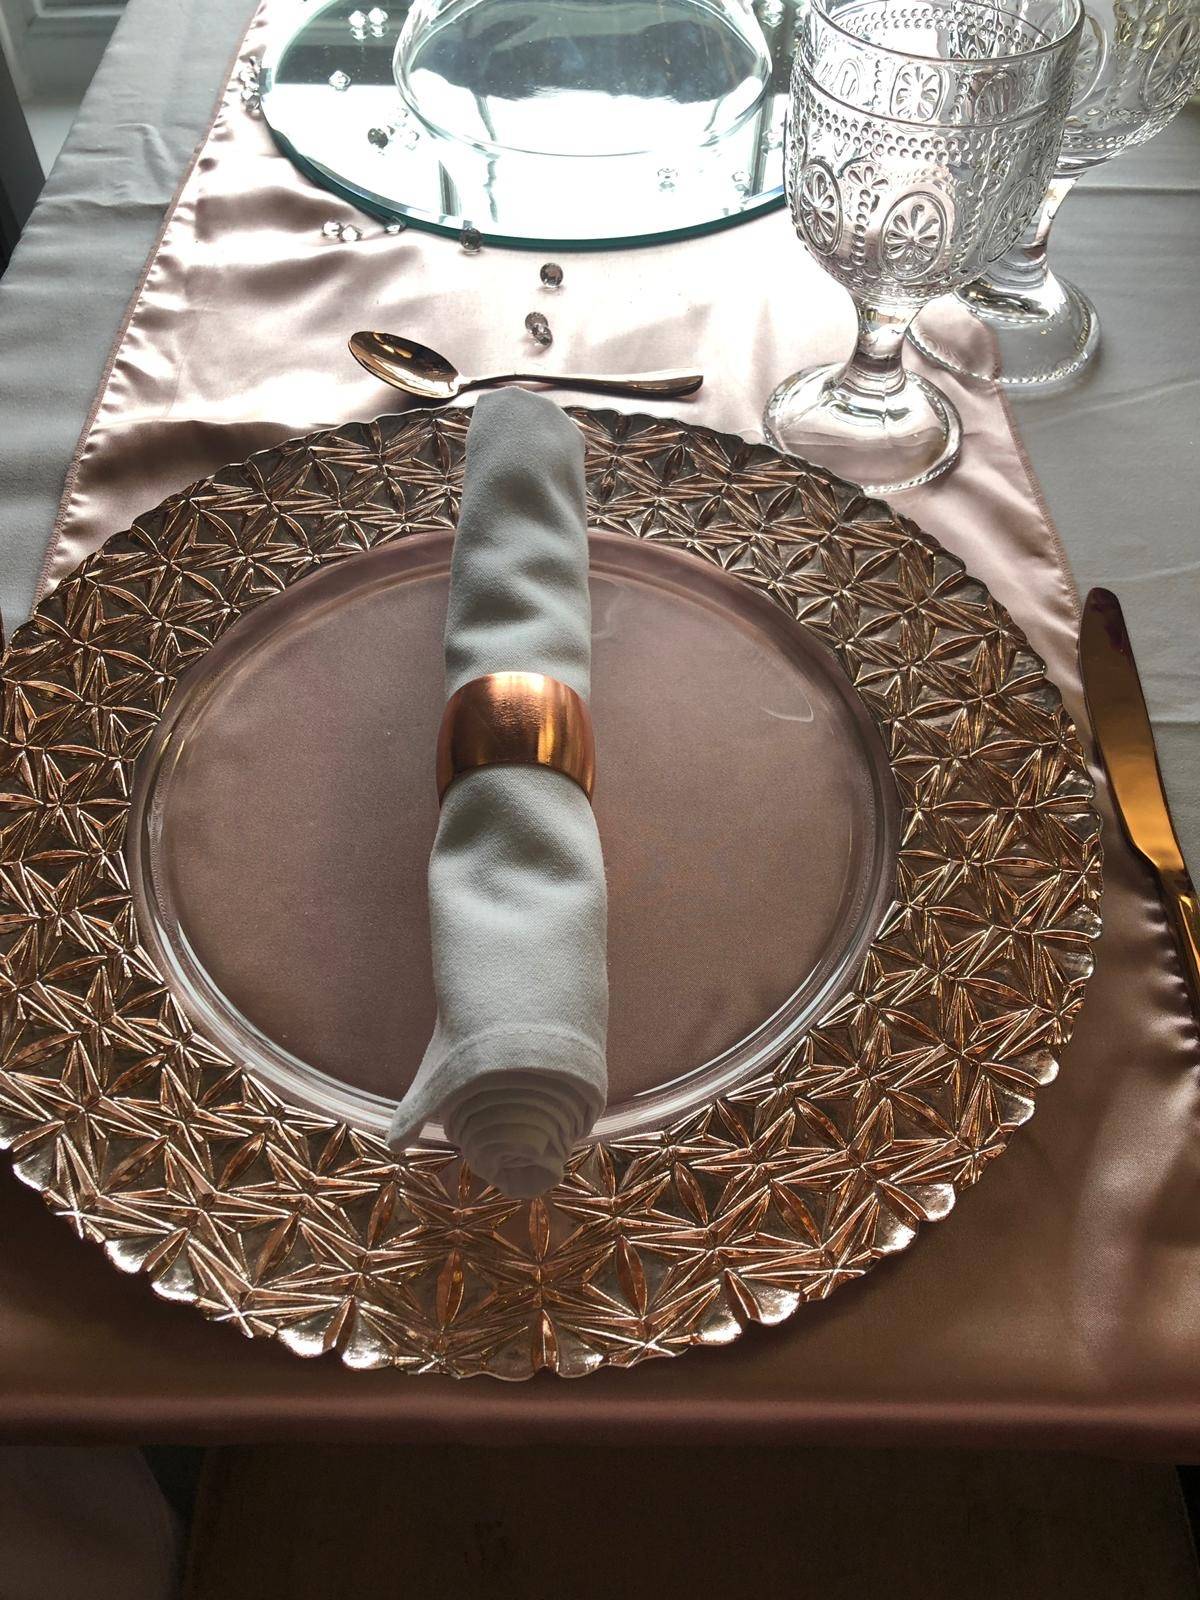 a place setting with a silver plate and silver napkin.